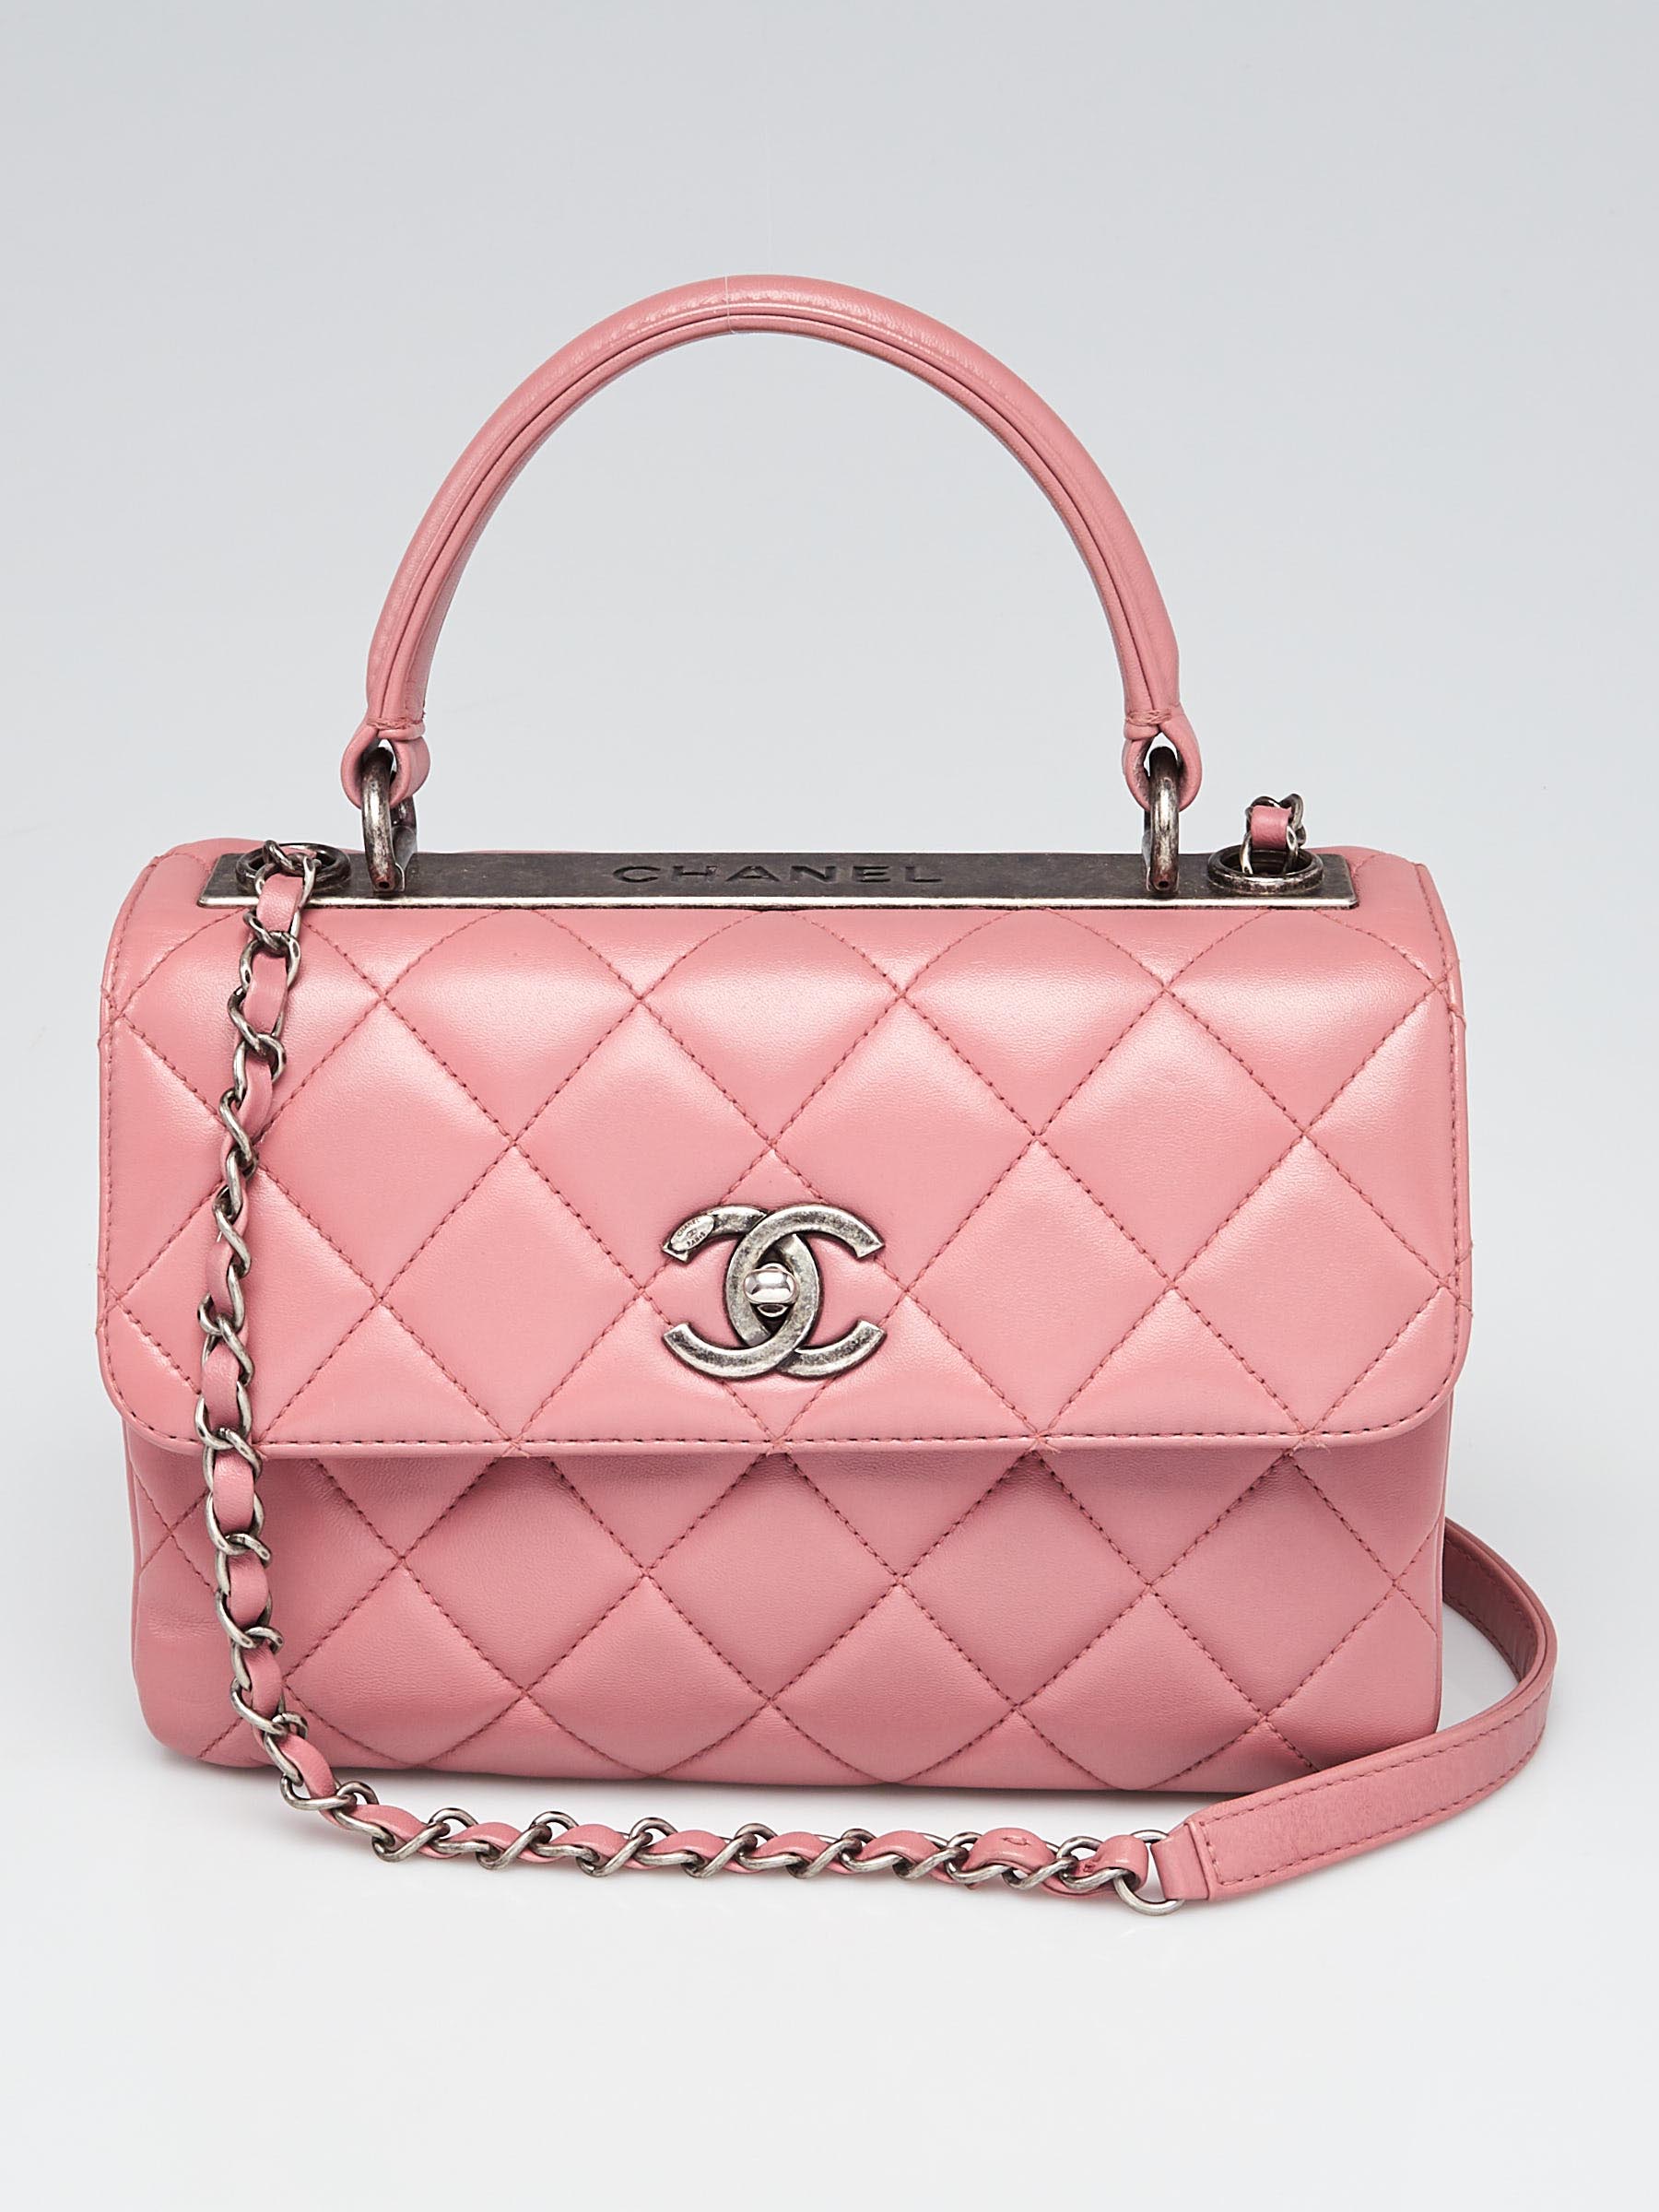 Chanel Pink Quilted Calfskin Leather Small Trendy CC Flap Bag